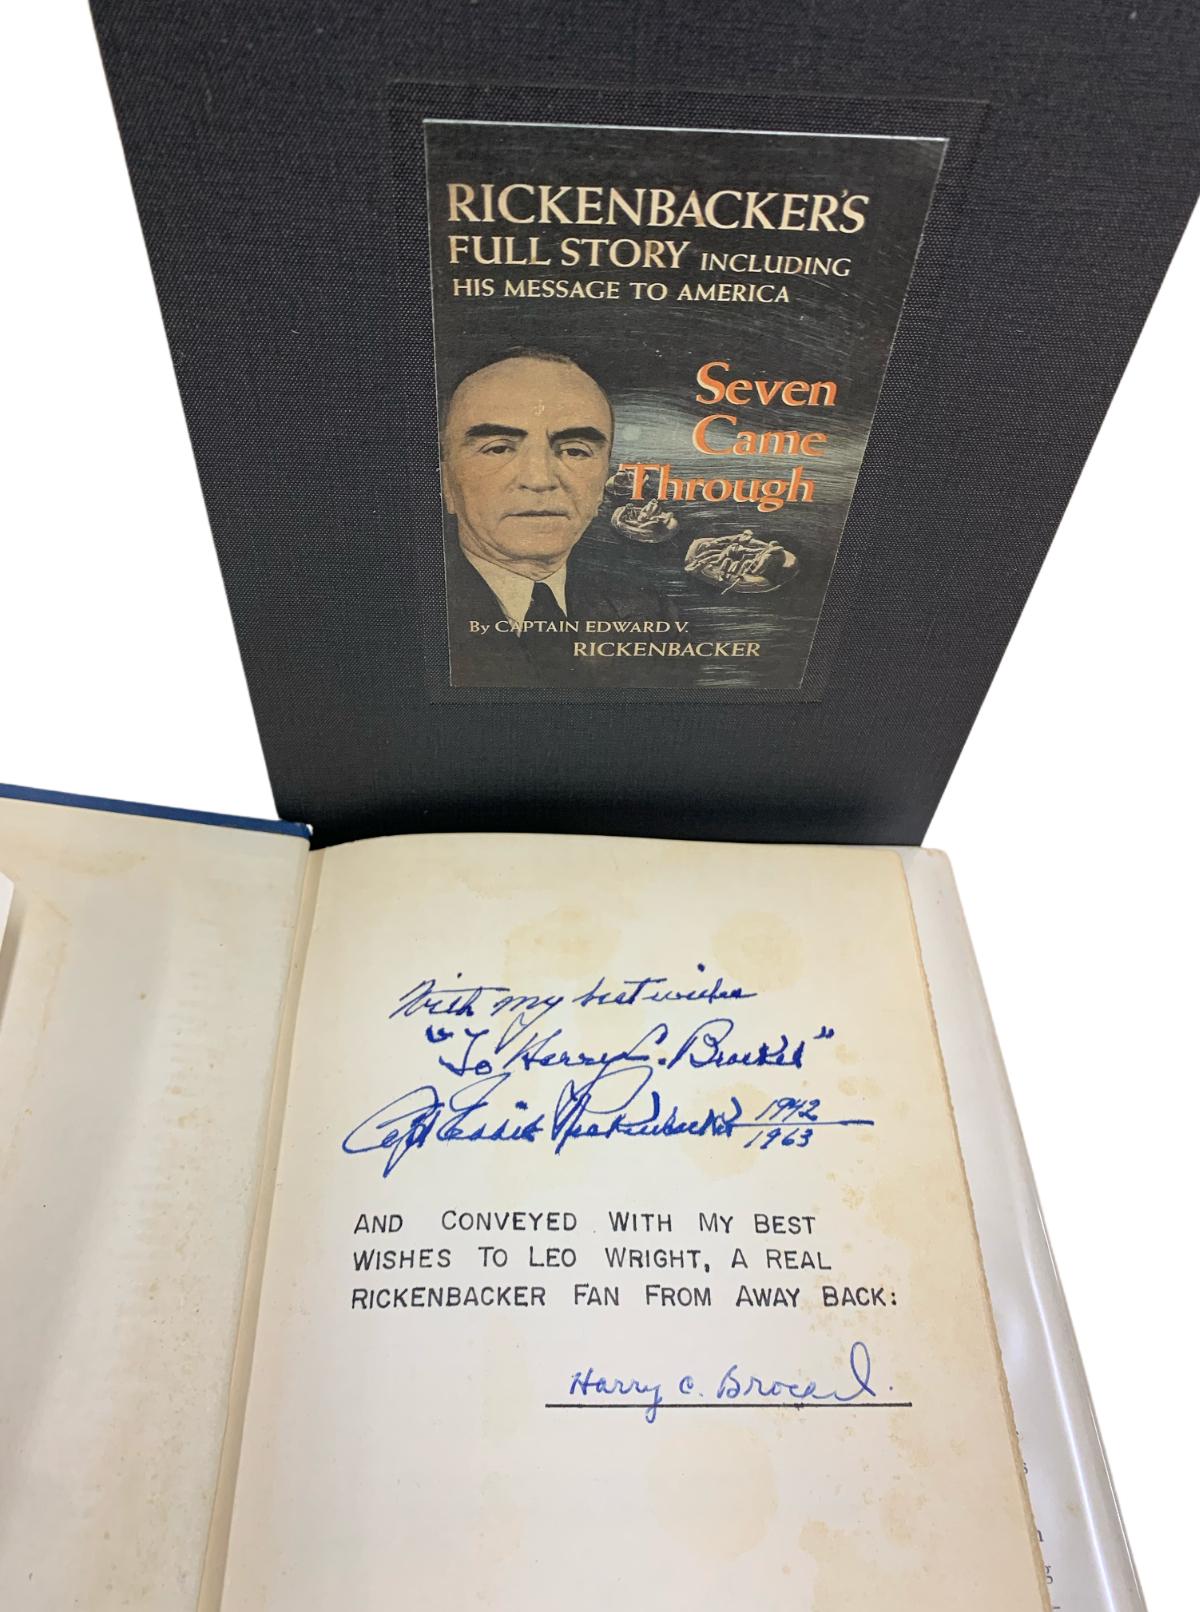 Rickenbacker, Captain Edward V. Seven Came Through. Garden City, NY: Doubleday, Doran & Company, Inc., 1943. First Edition. Octavo. Signed by Rickenbacker. Presented in its original dust jacket and boards. With a new black cloth archival slipcase.